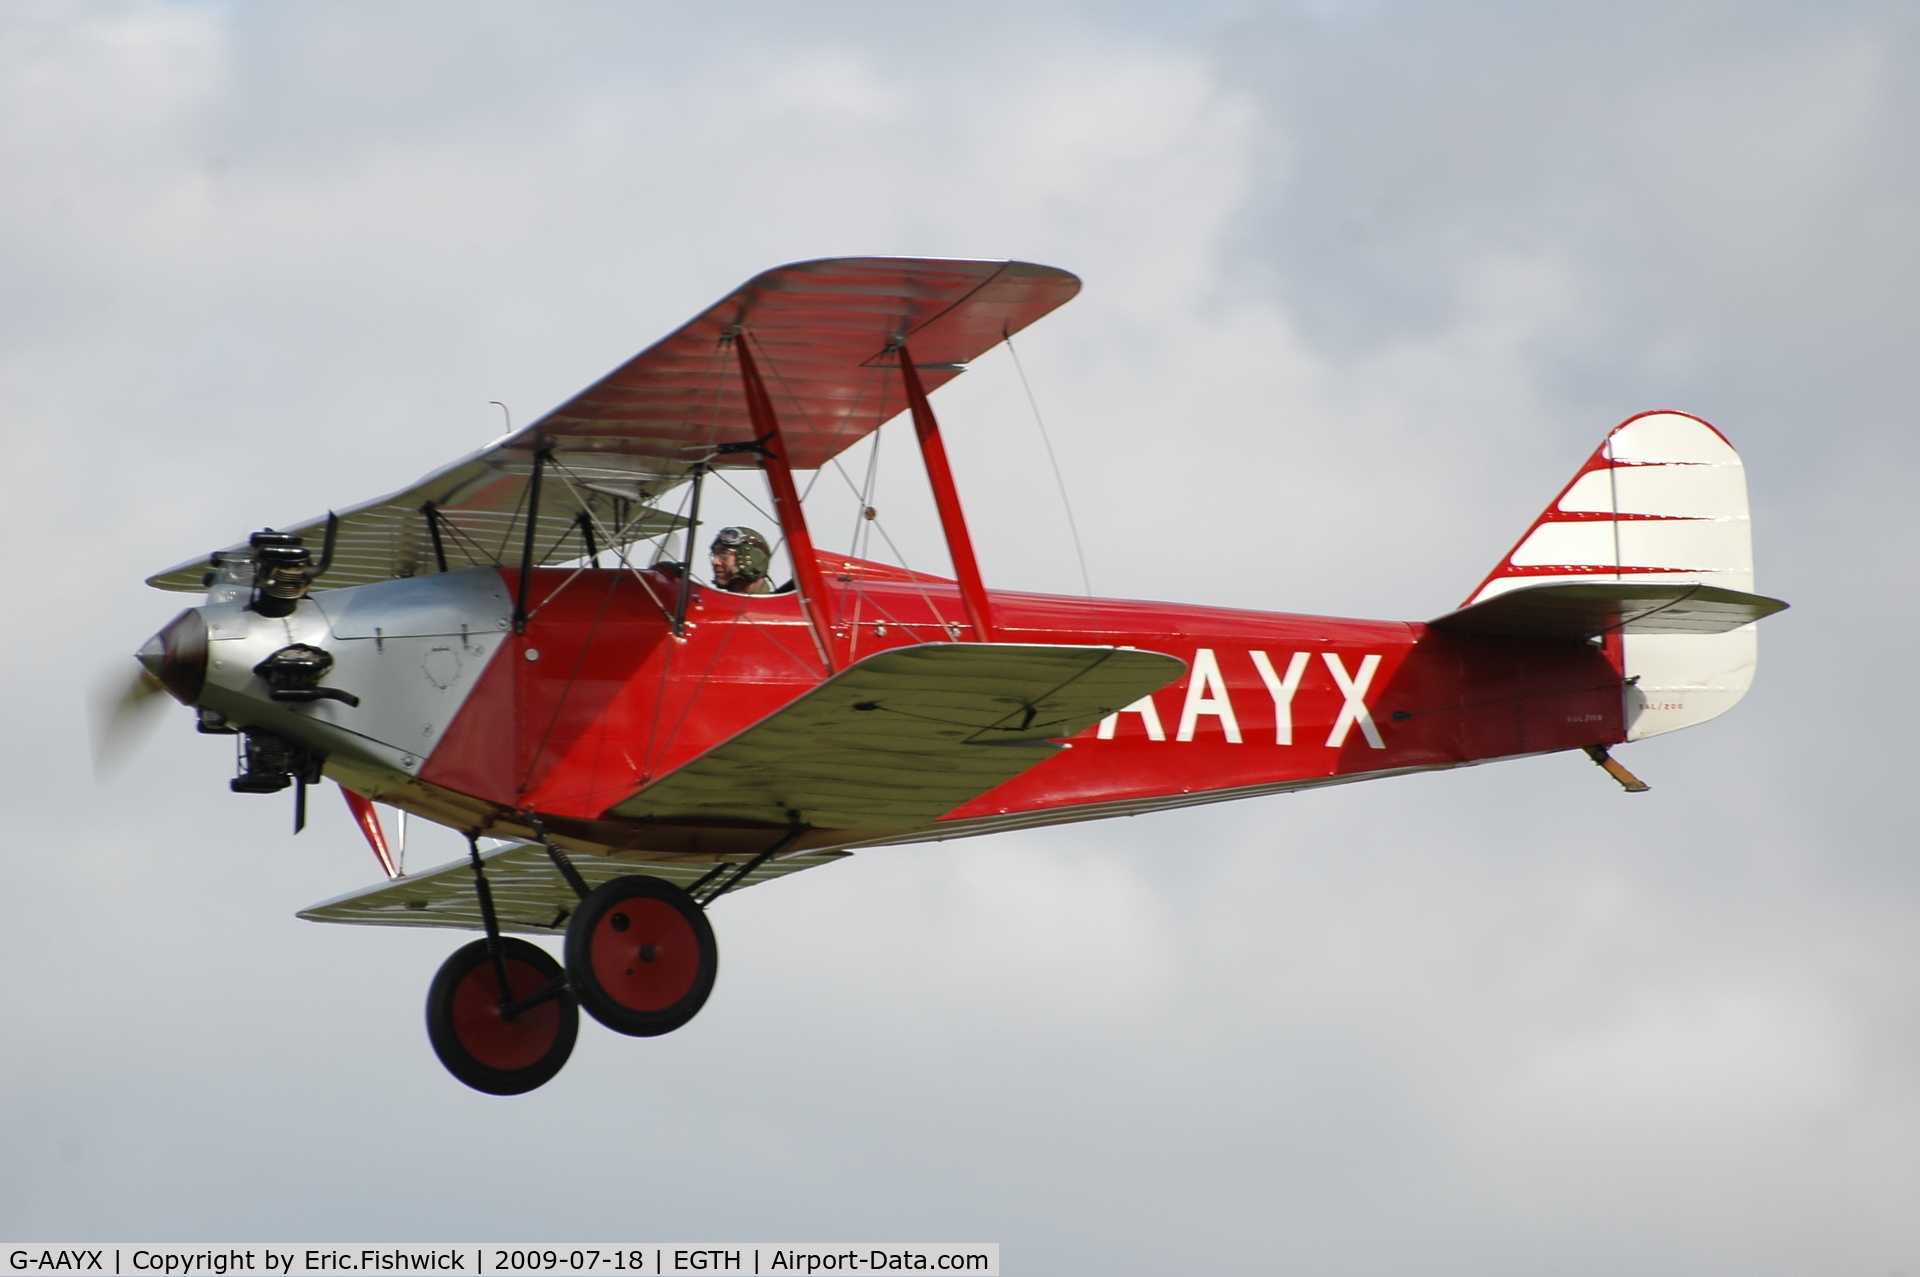 G-AAYX, 1930 Southern Martlet C/N 202, 44. G-AAYX at Shuttleworth Evening Air Display July 09